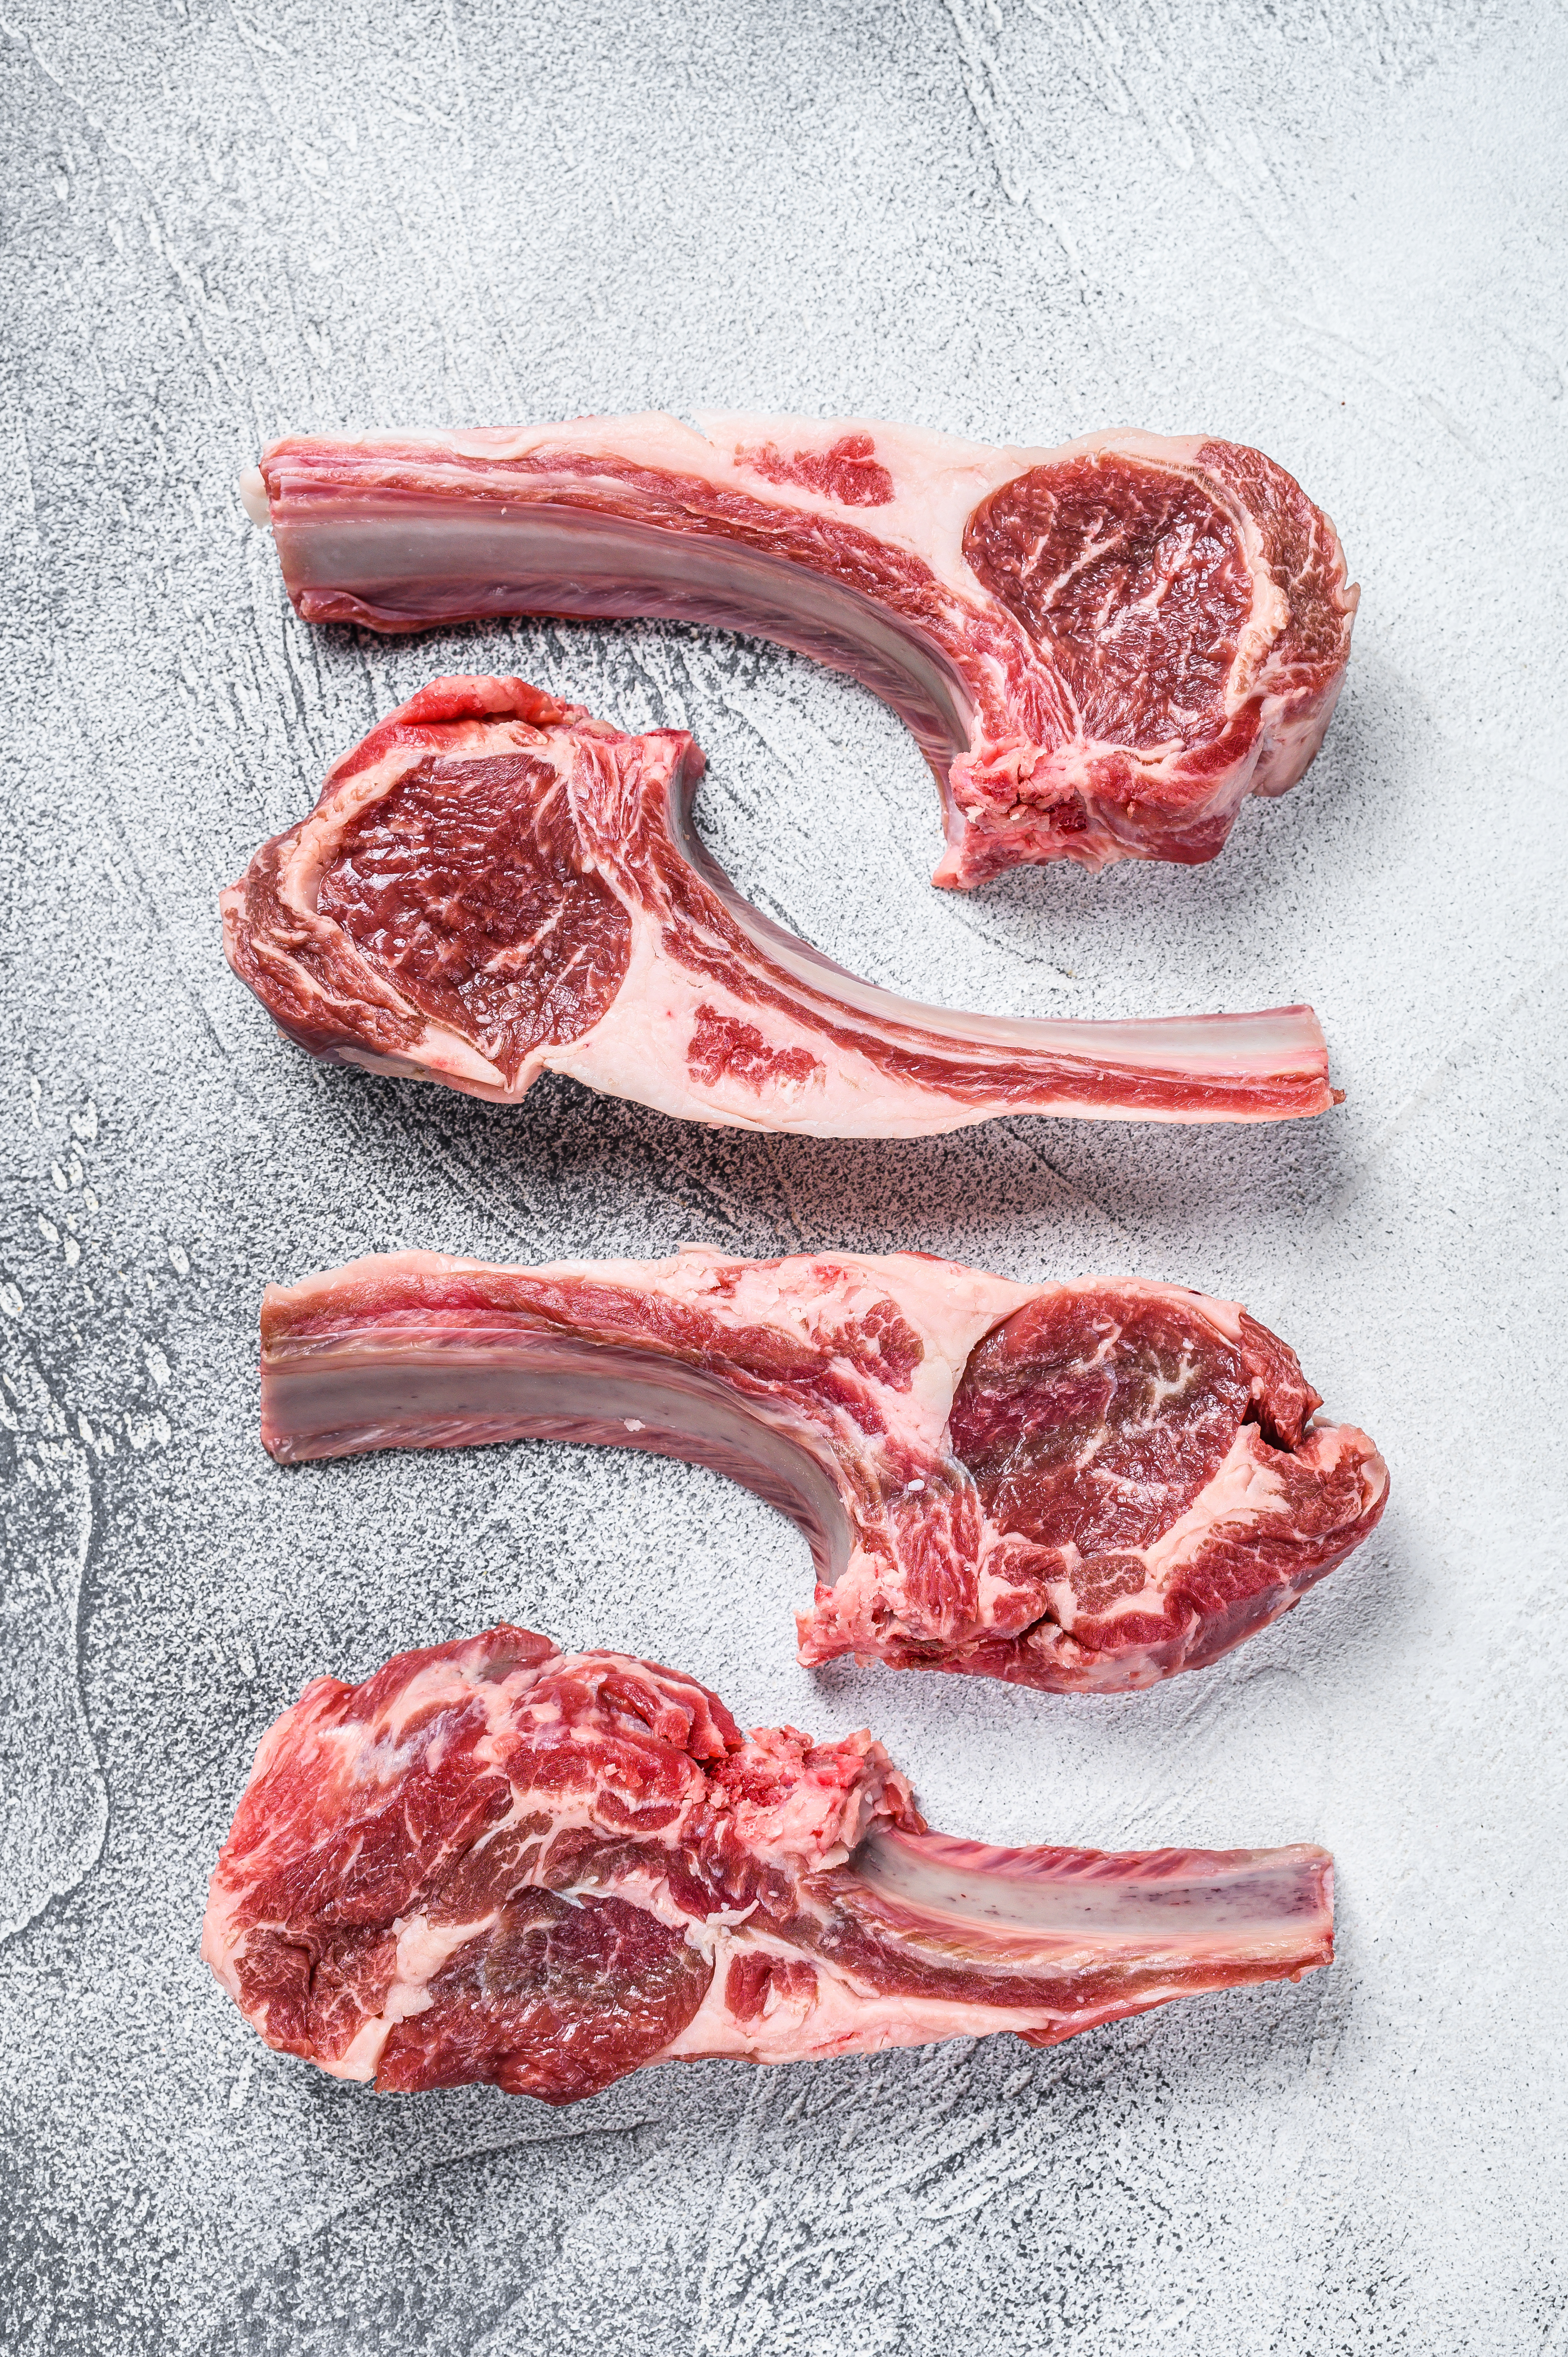 Raw lamb meat chops on a butcher table. White background. Top view